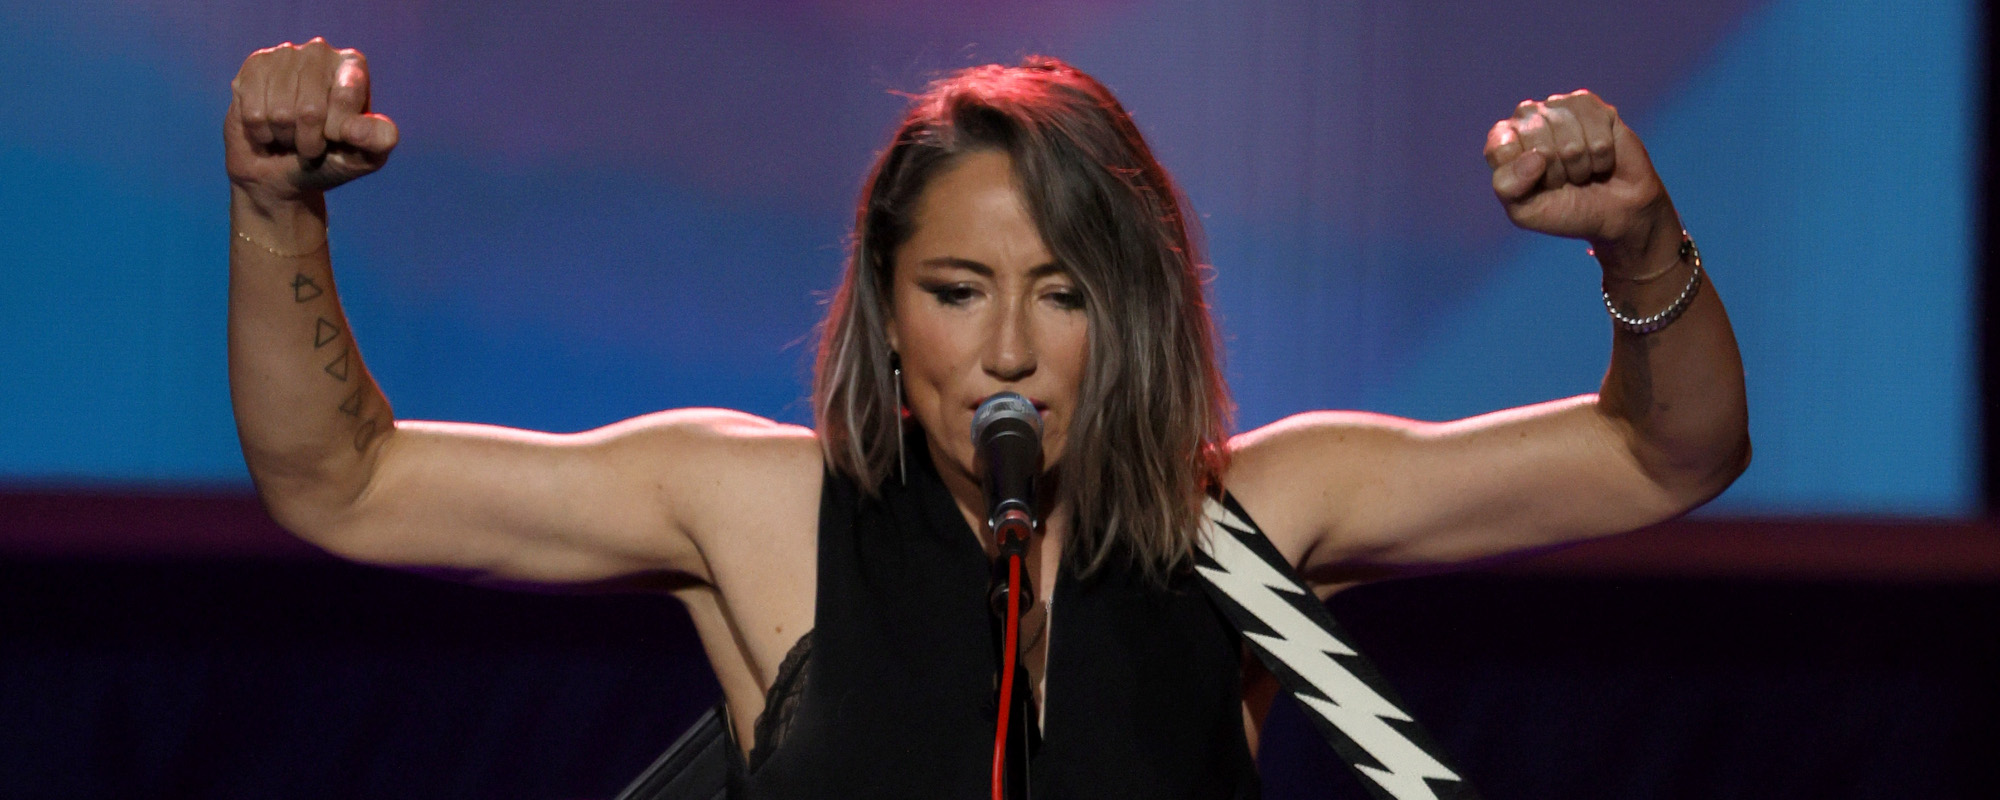 The Unlikely Success Story Behind KT Tunstall’s “Black Horse and the Cherry Tree”